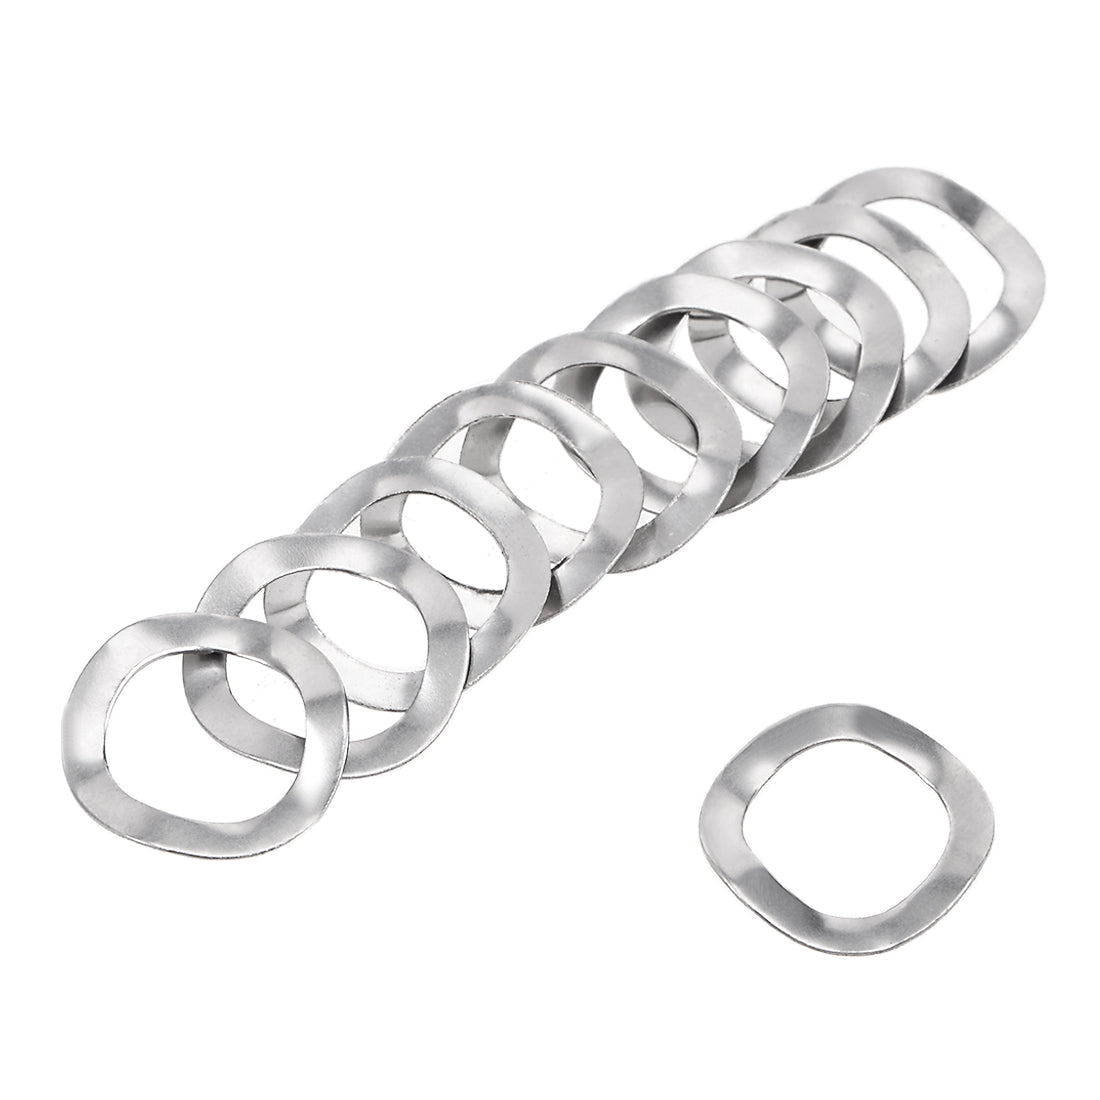 uxcell Uxcell 10Pcs 304 Stainless Steel Wave Spring Washer for Screw Bolt